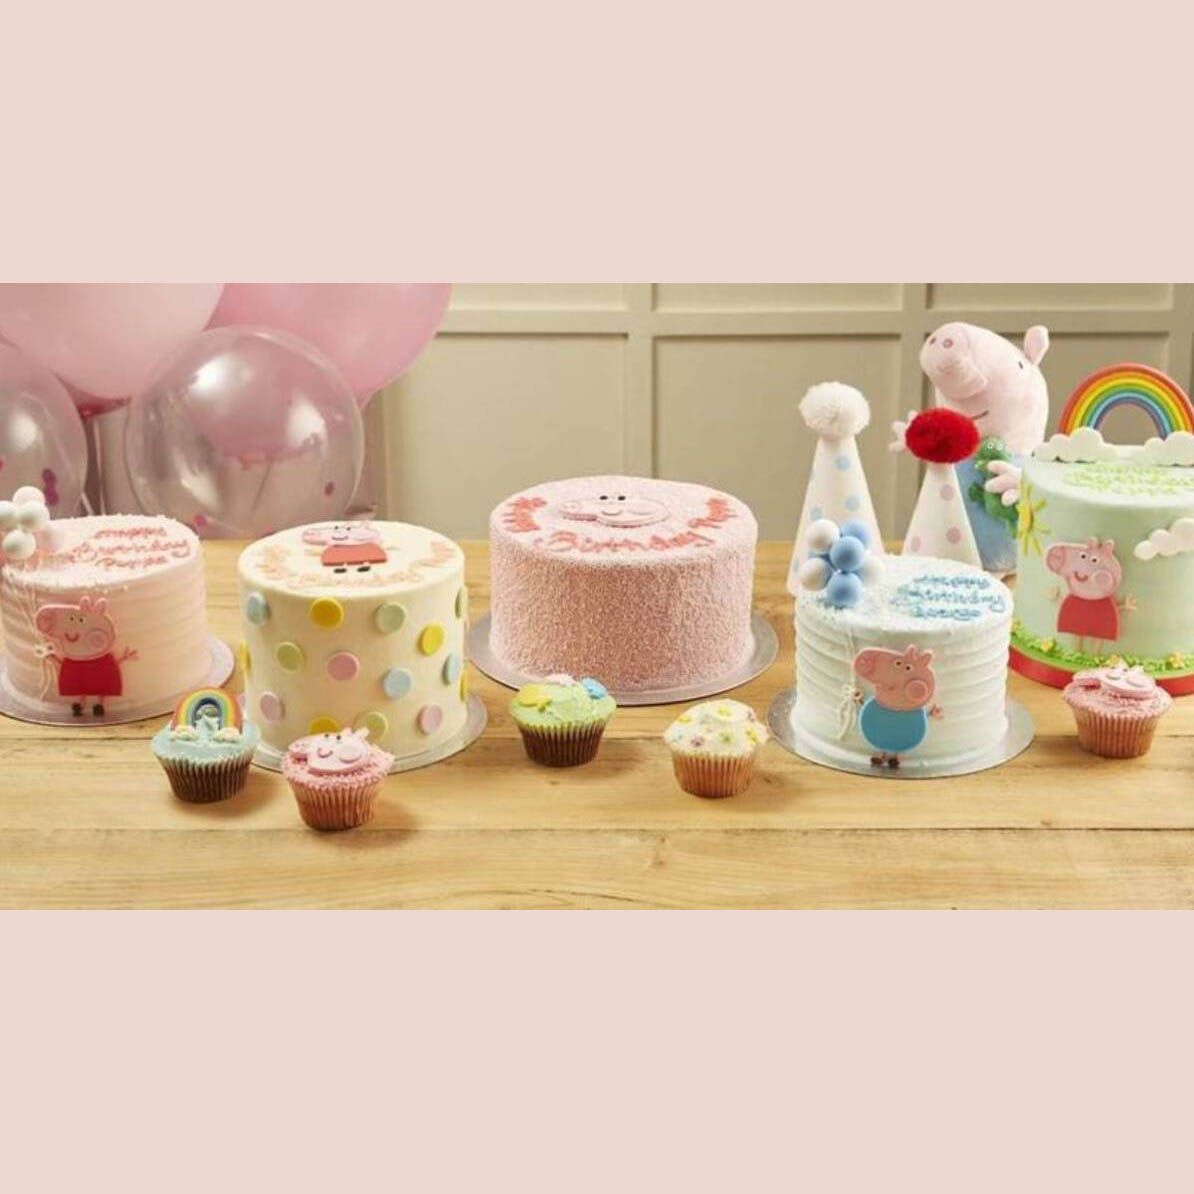 Hummingbird Bakery Launches Peppa Pig Collection